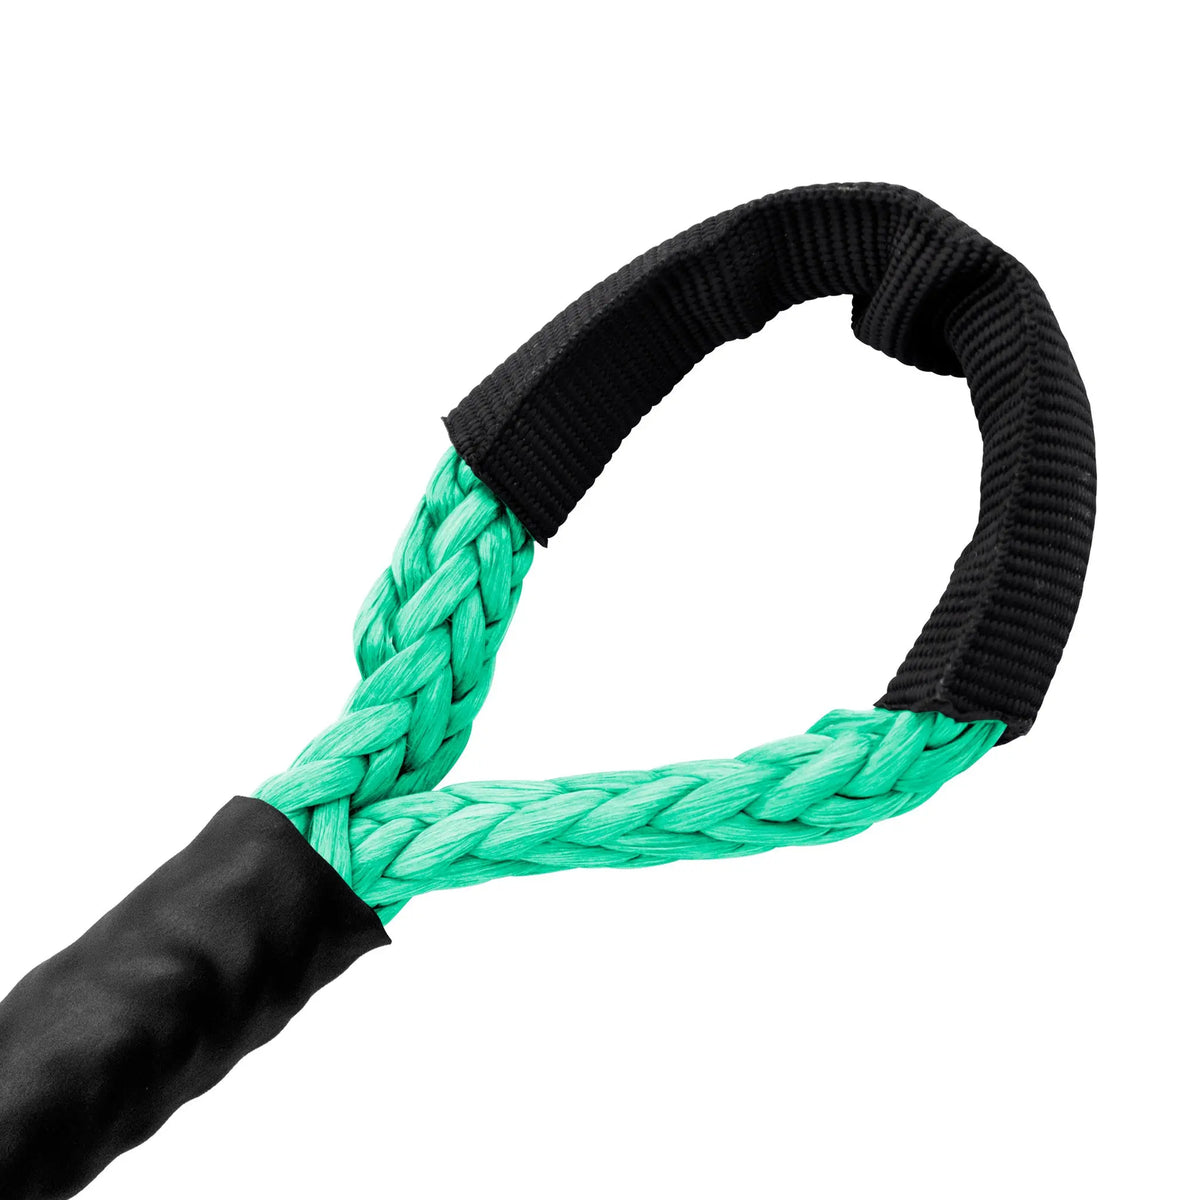 1/4 Diamond Synthetic Winch Rope Soft Eye - Teal Green.